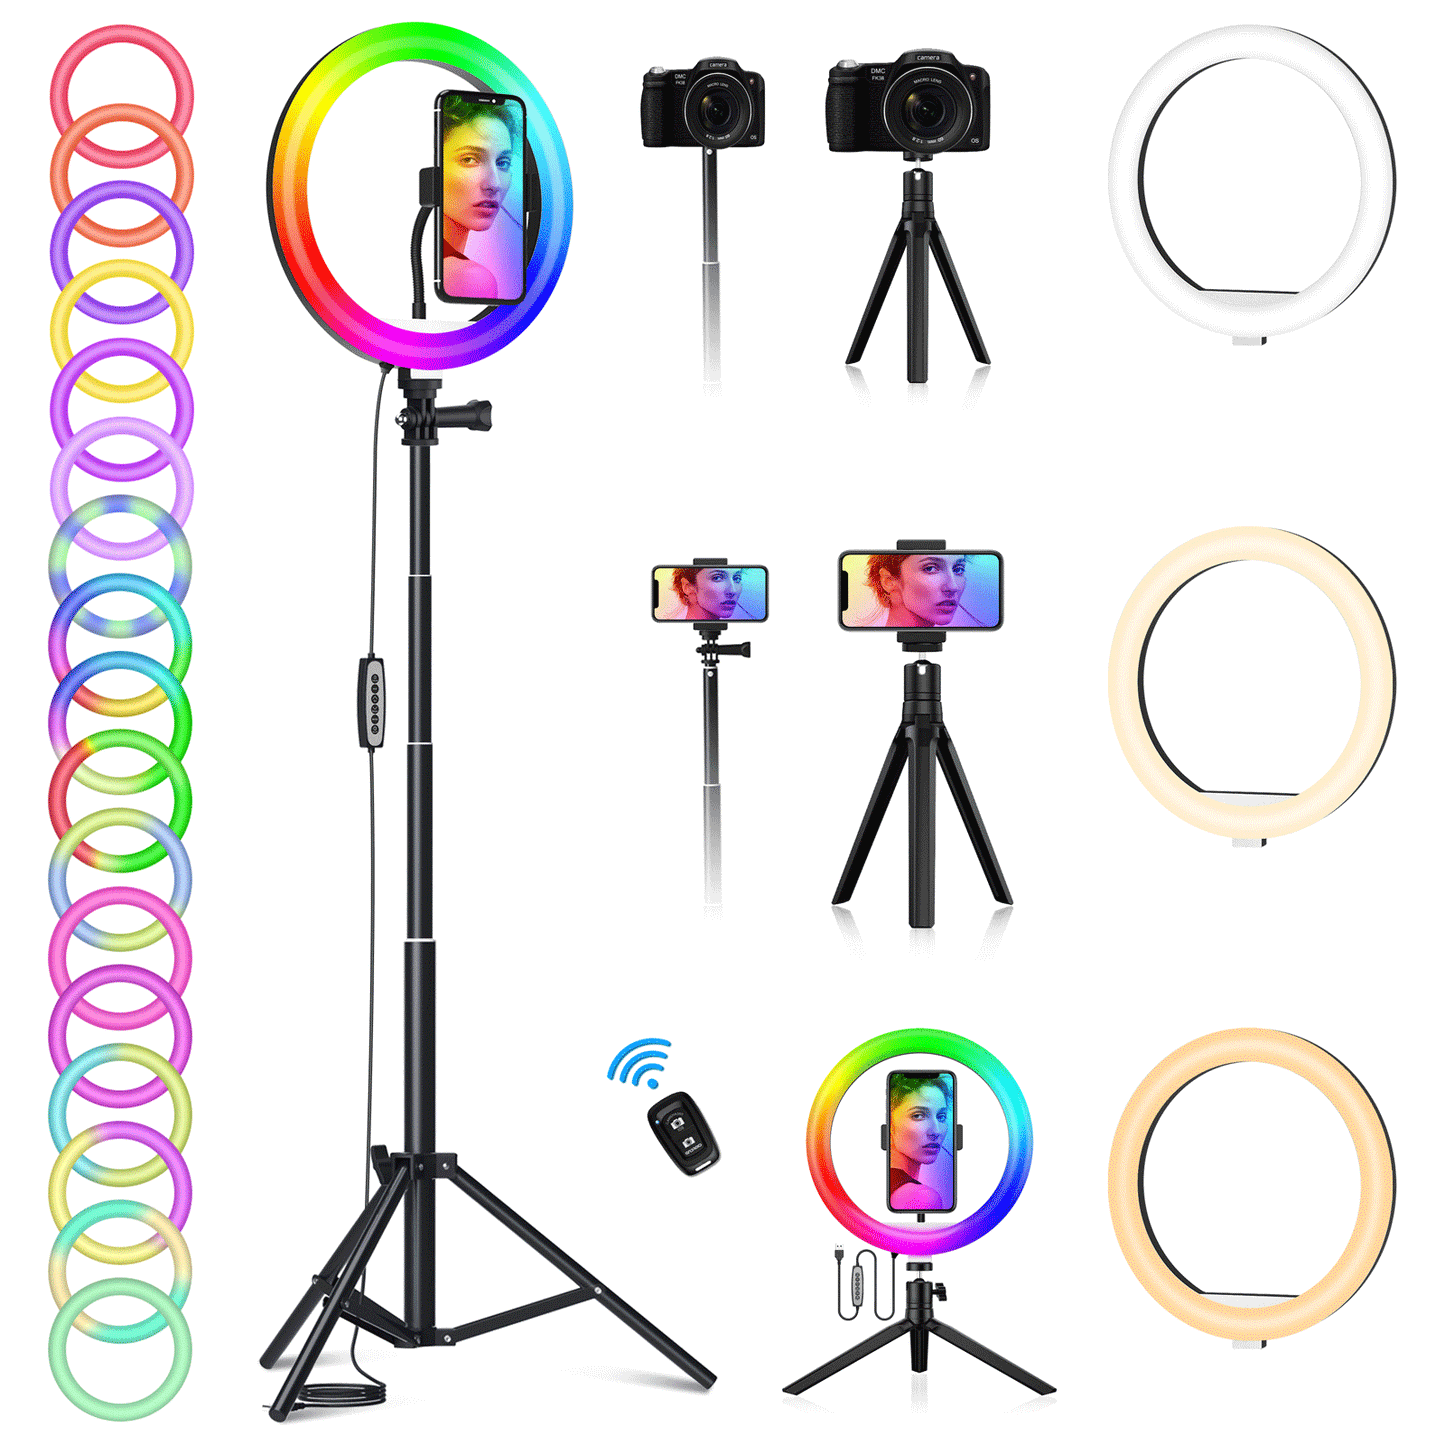 JEEMAK 10" RGB Selfie Ring Light with Tripod/Tabletop Stand Phone Holder, Ringlights with Stand Bluetooth Remote ,35 Colour Changing LED Circle Ring Light for Phone Camera Video Shooting/Photography